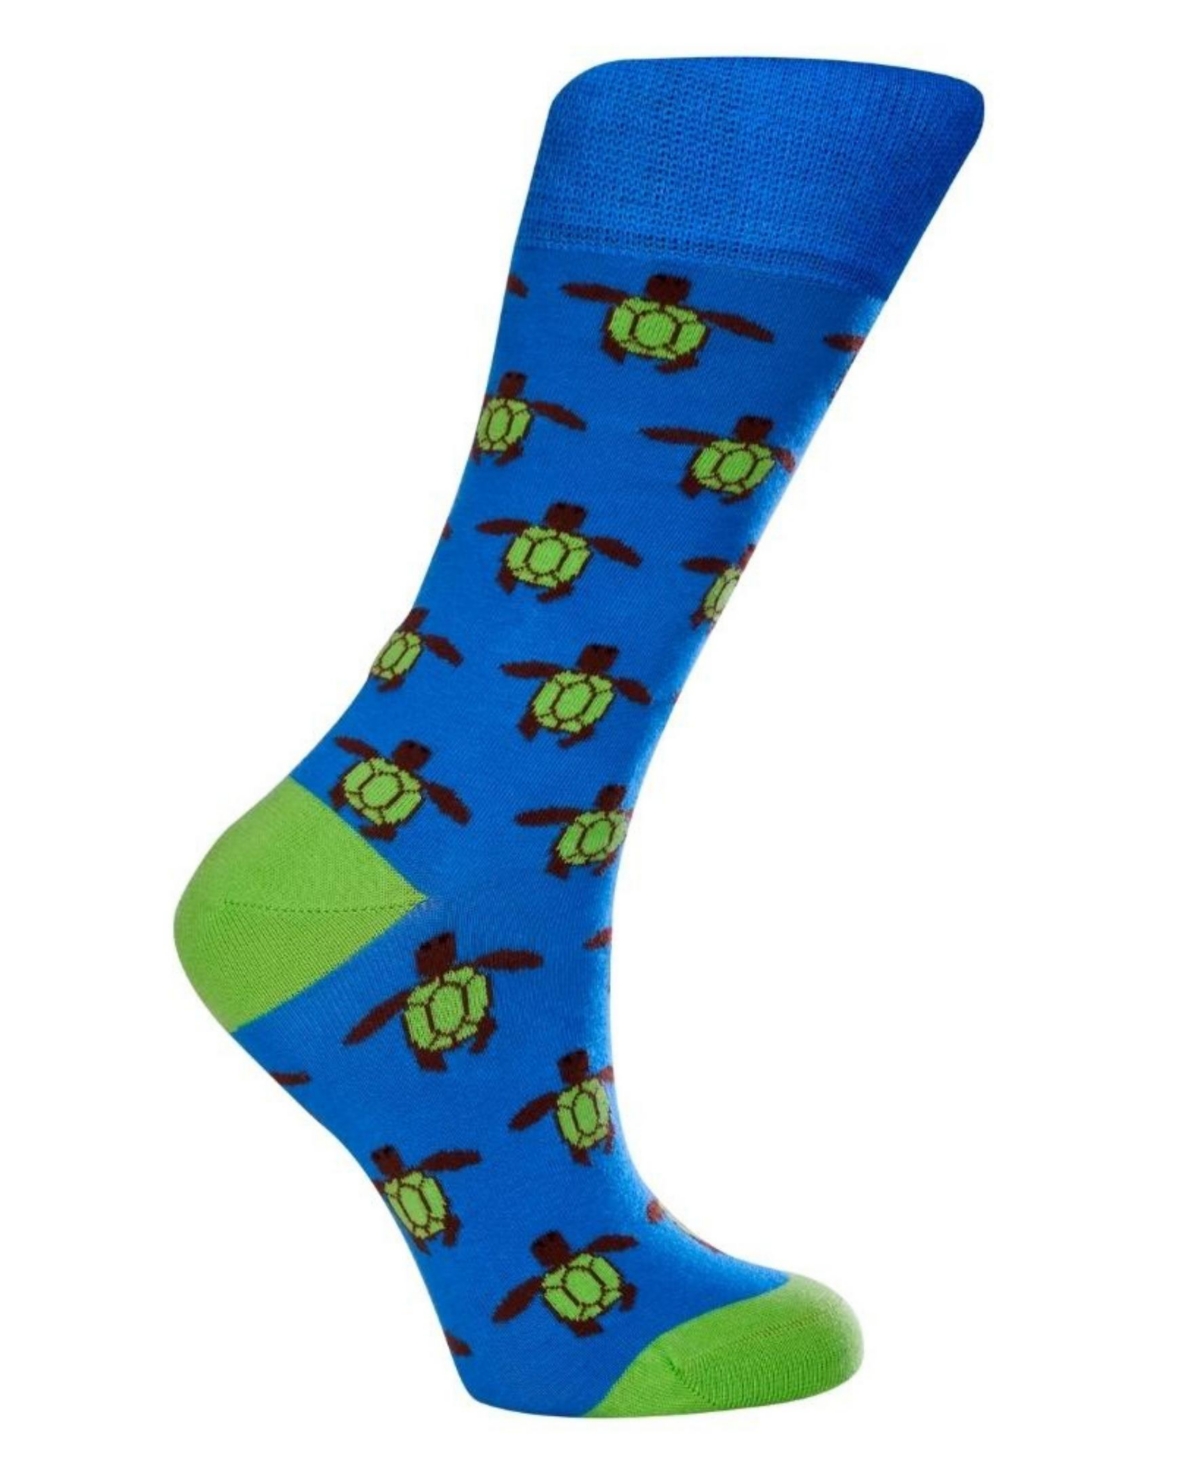 Women's Turtle W-Cotton Novelty Crew Socks with Seamless Toe Design, Pack of 1 - Turquoise